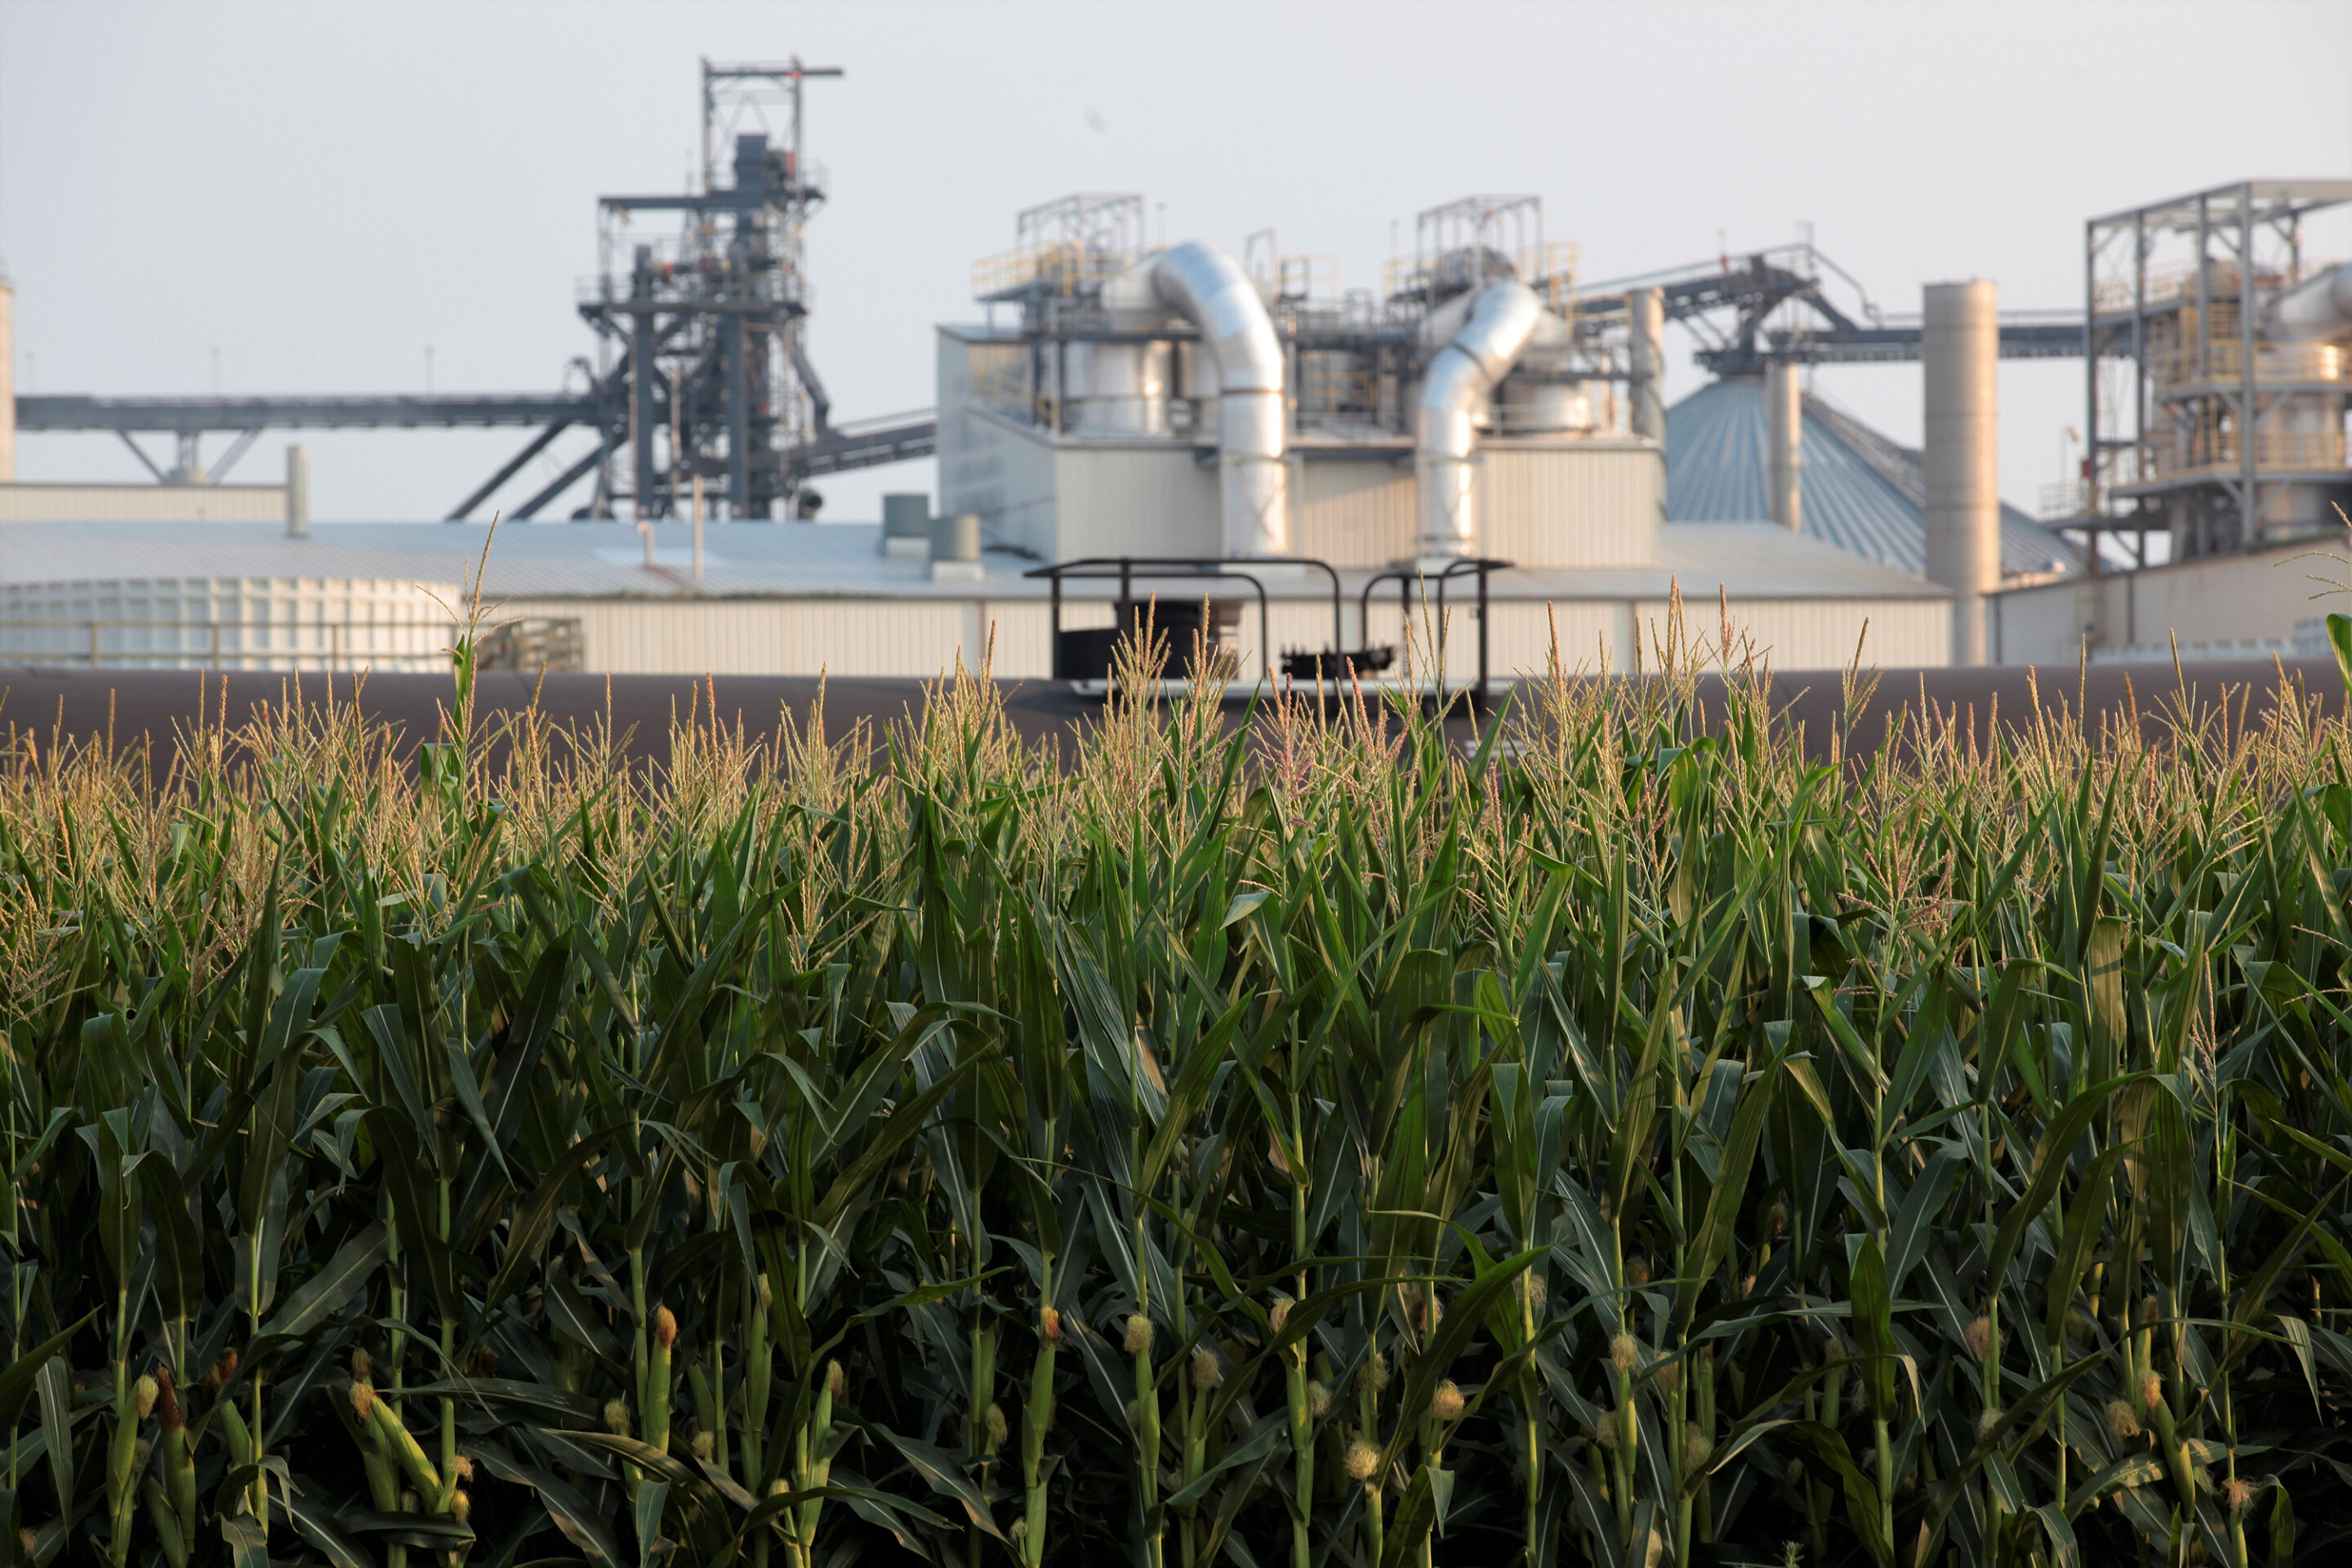 #EPA seeks to mandate more use of ethanol and other biofuels